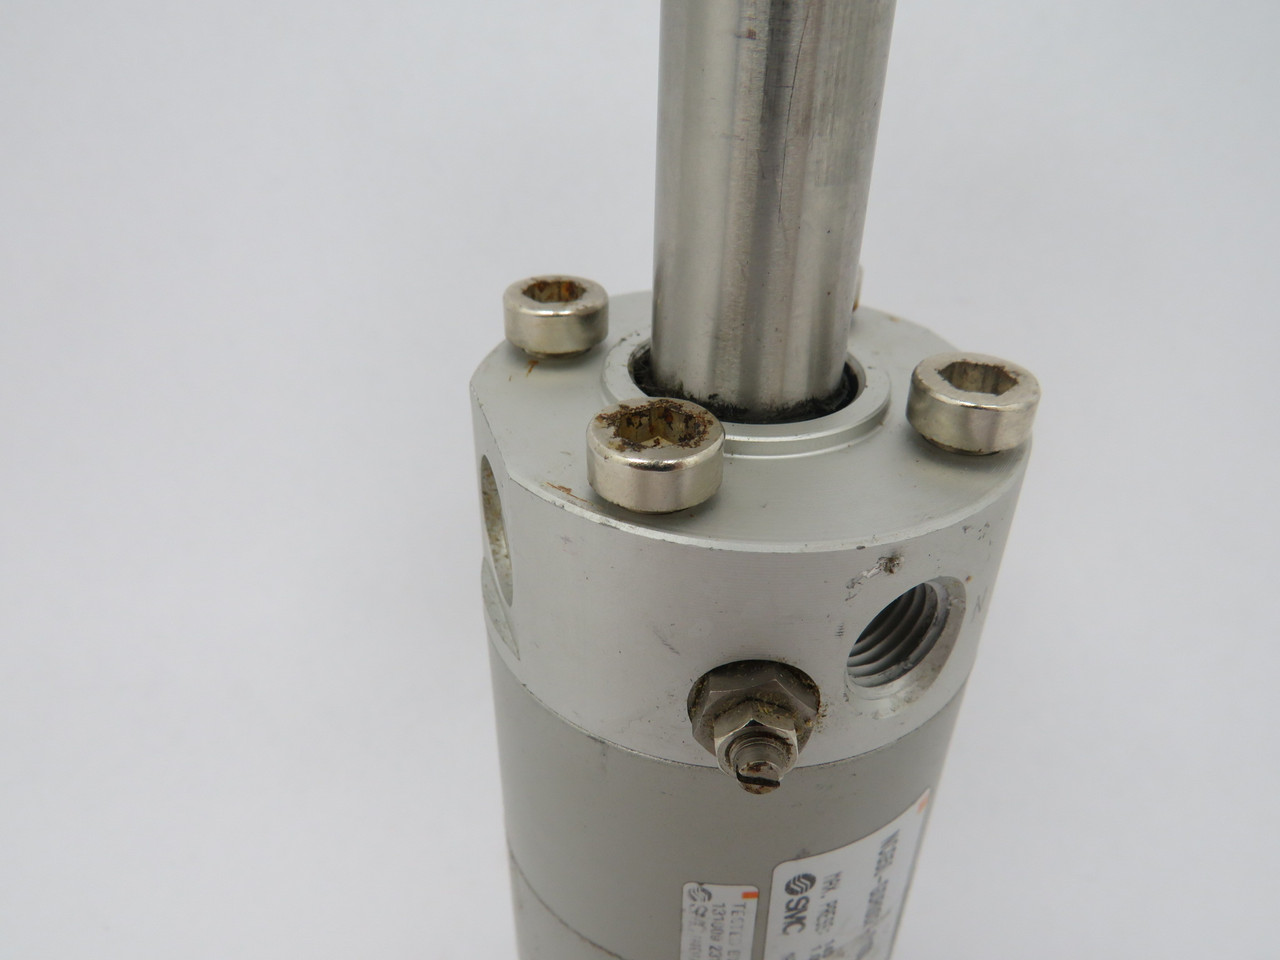 SMC NCG50-GDR002-0100 Pneumatic Cylinder 50mm Bore 100mm Stroke *Some Rust* USED